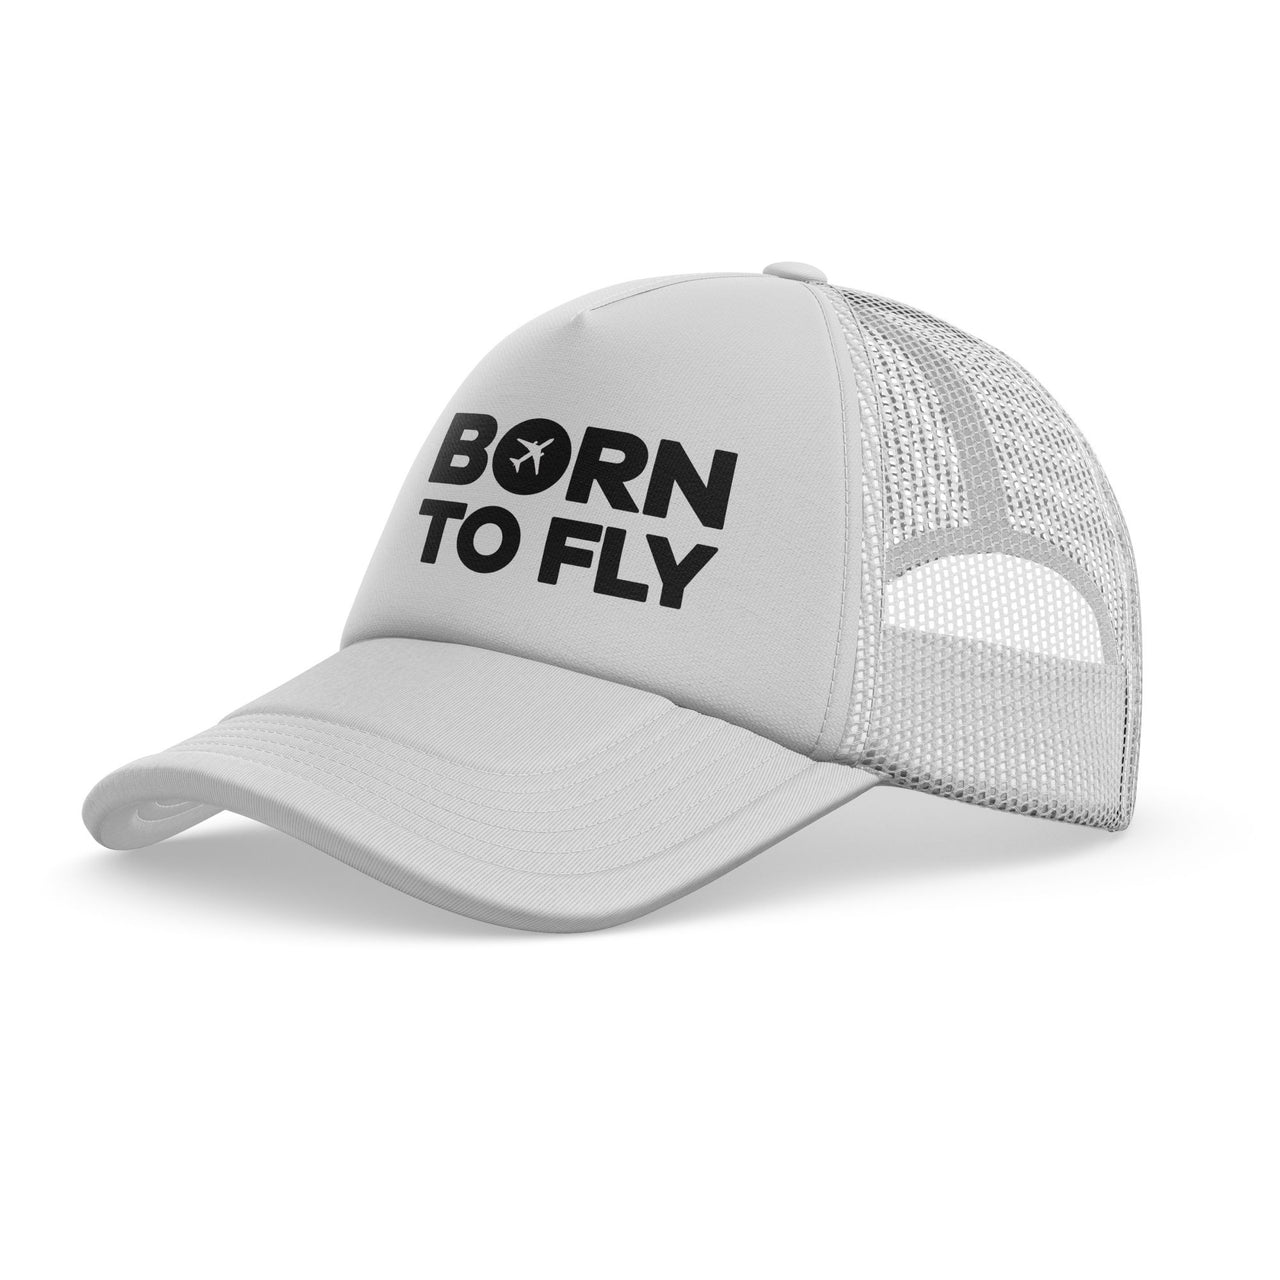 Born To Fly Special Designed Trucker Caps & Hats